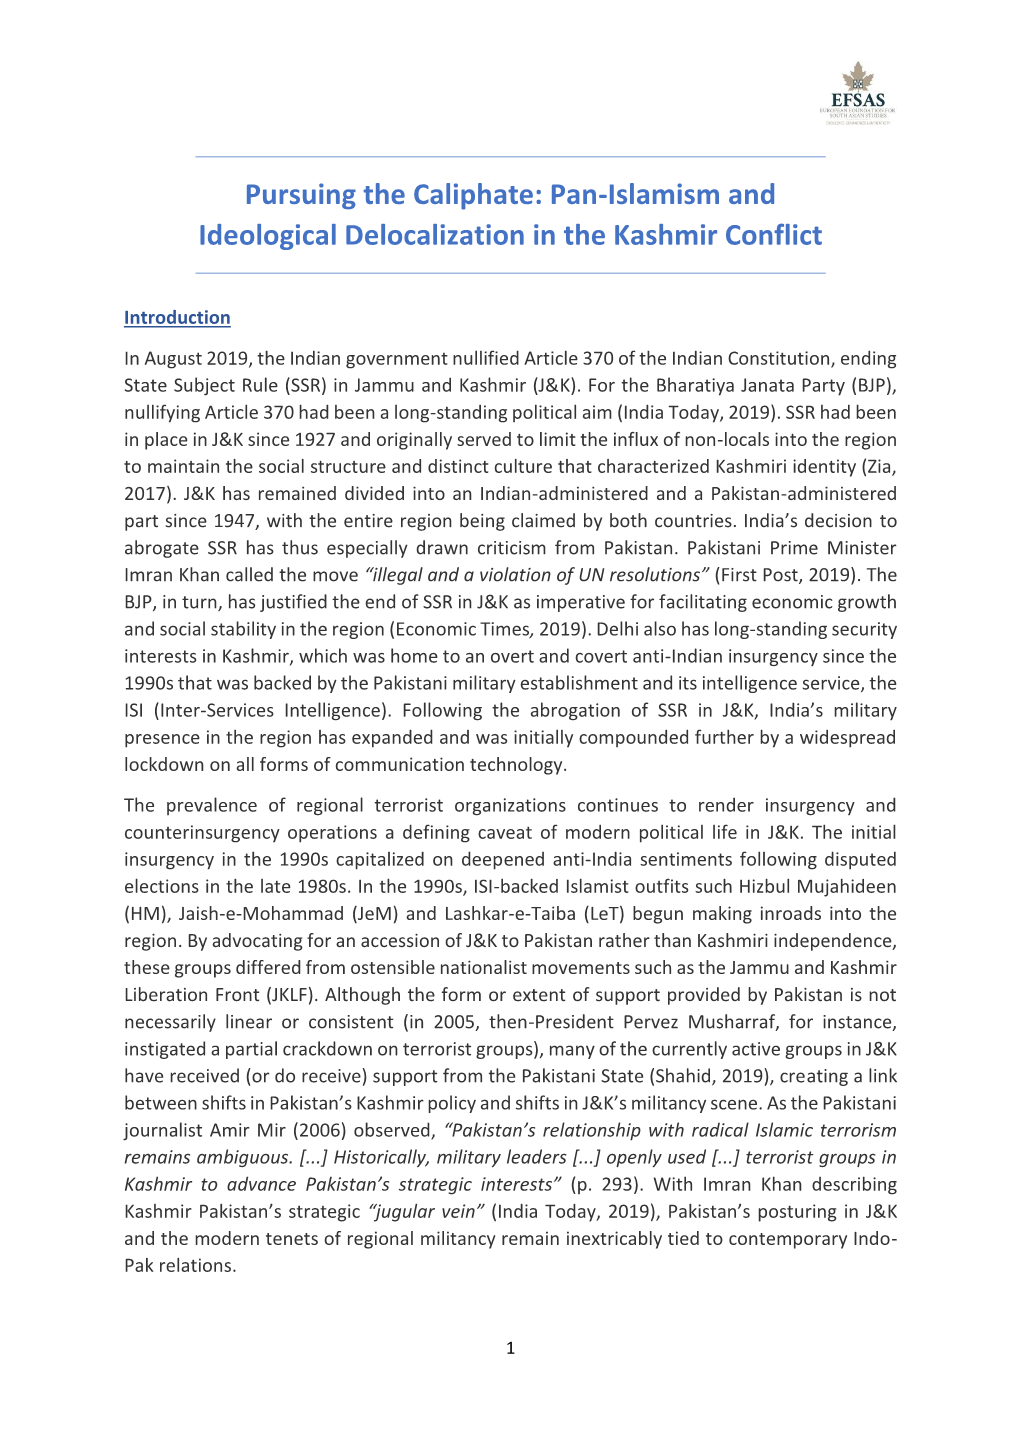 Pan-Islamism and Ideological Delocalization in the Kashmir Conflict